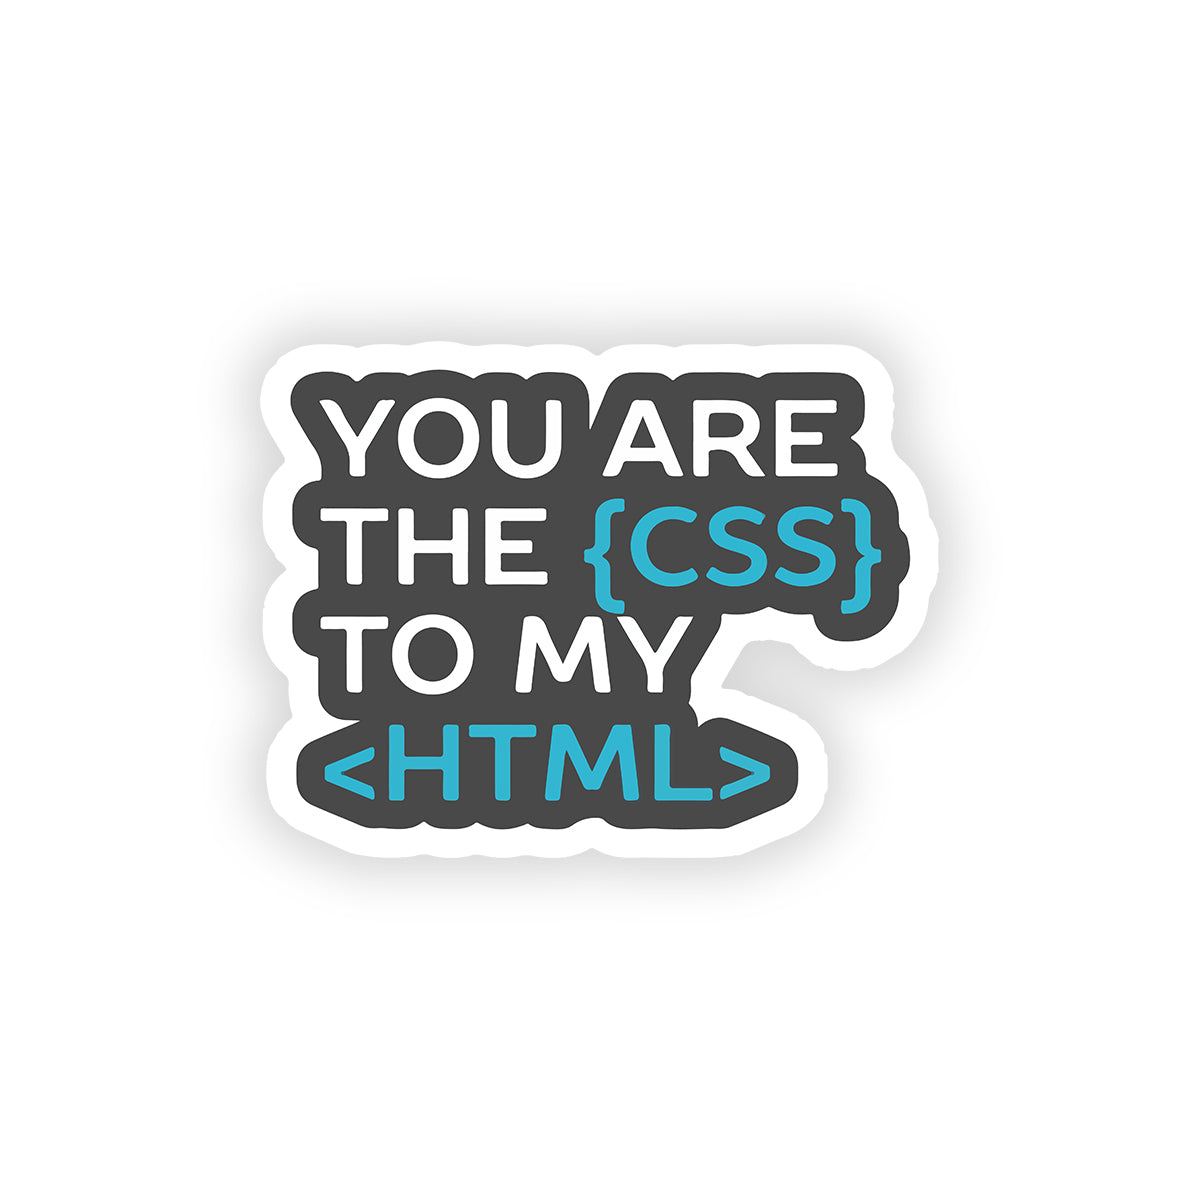 You are the css to my html